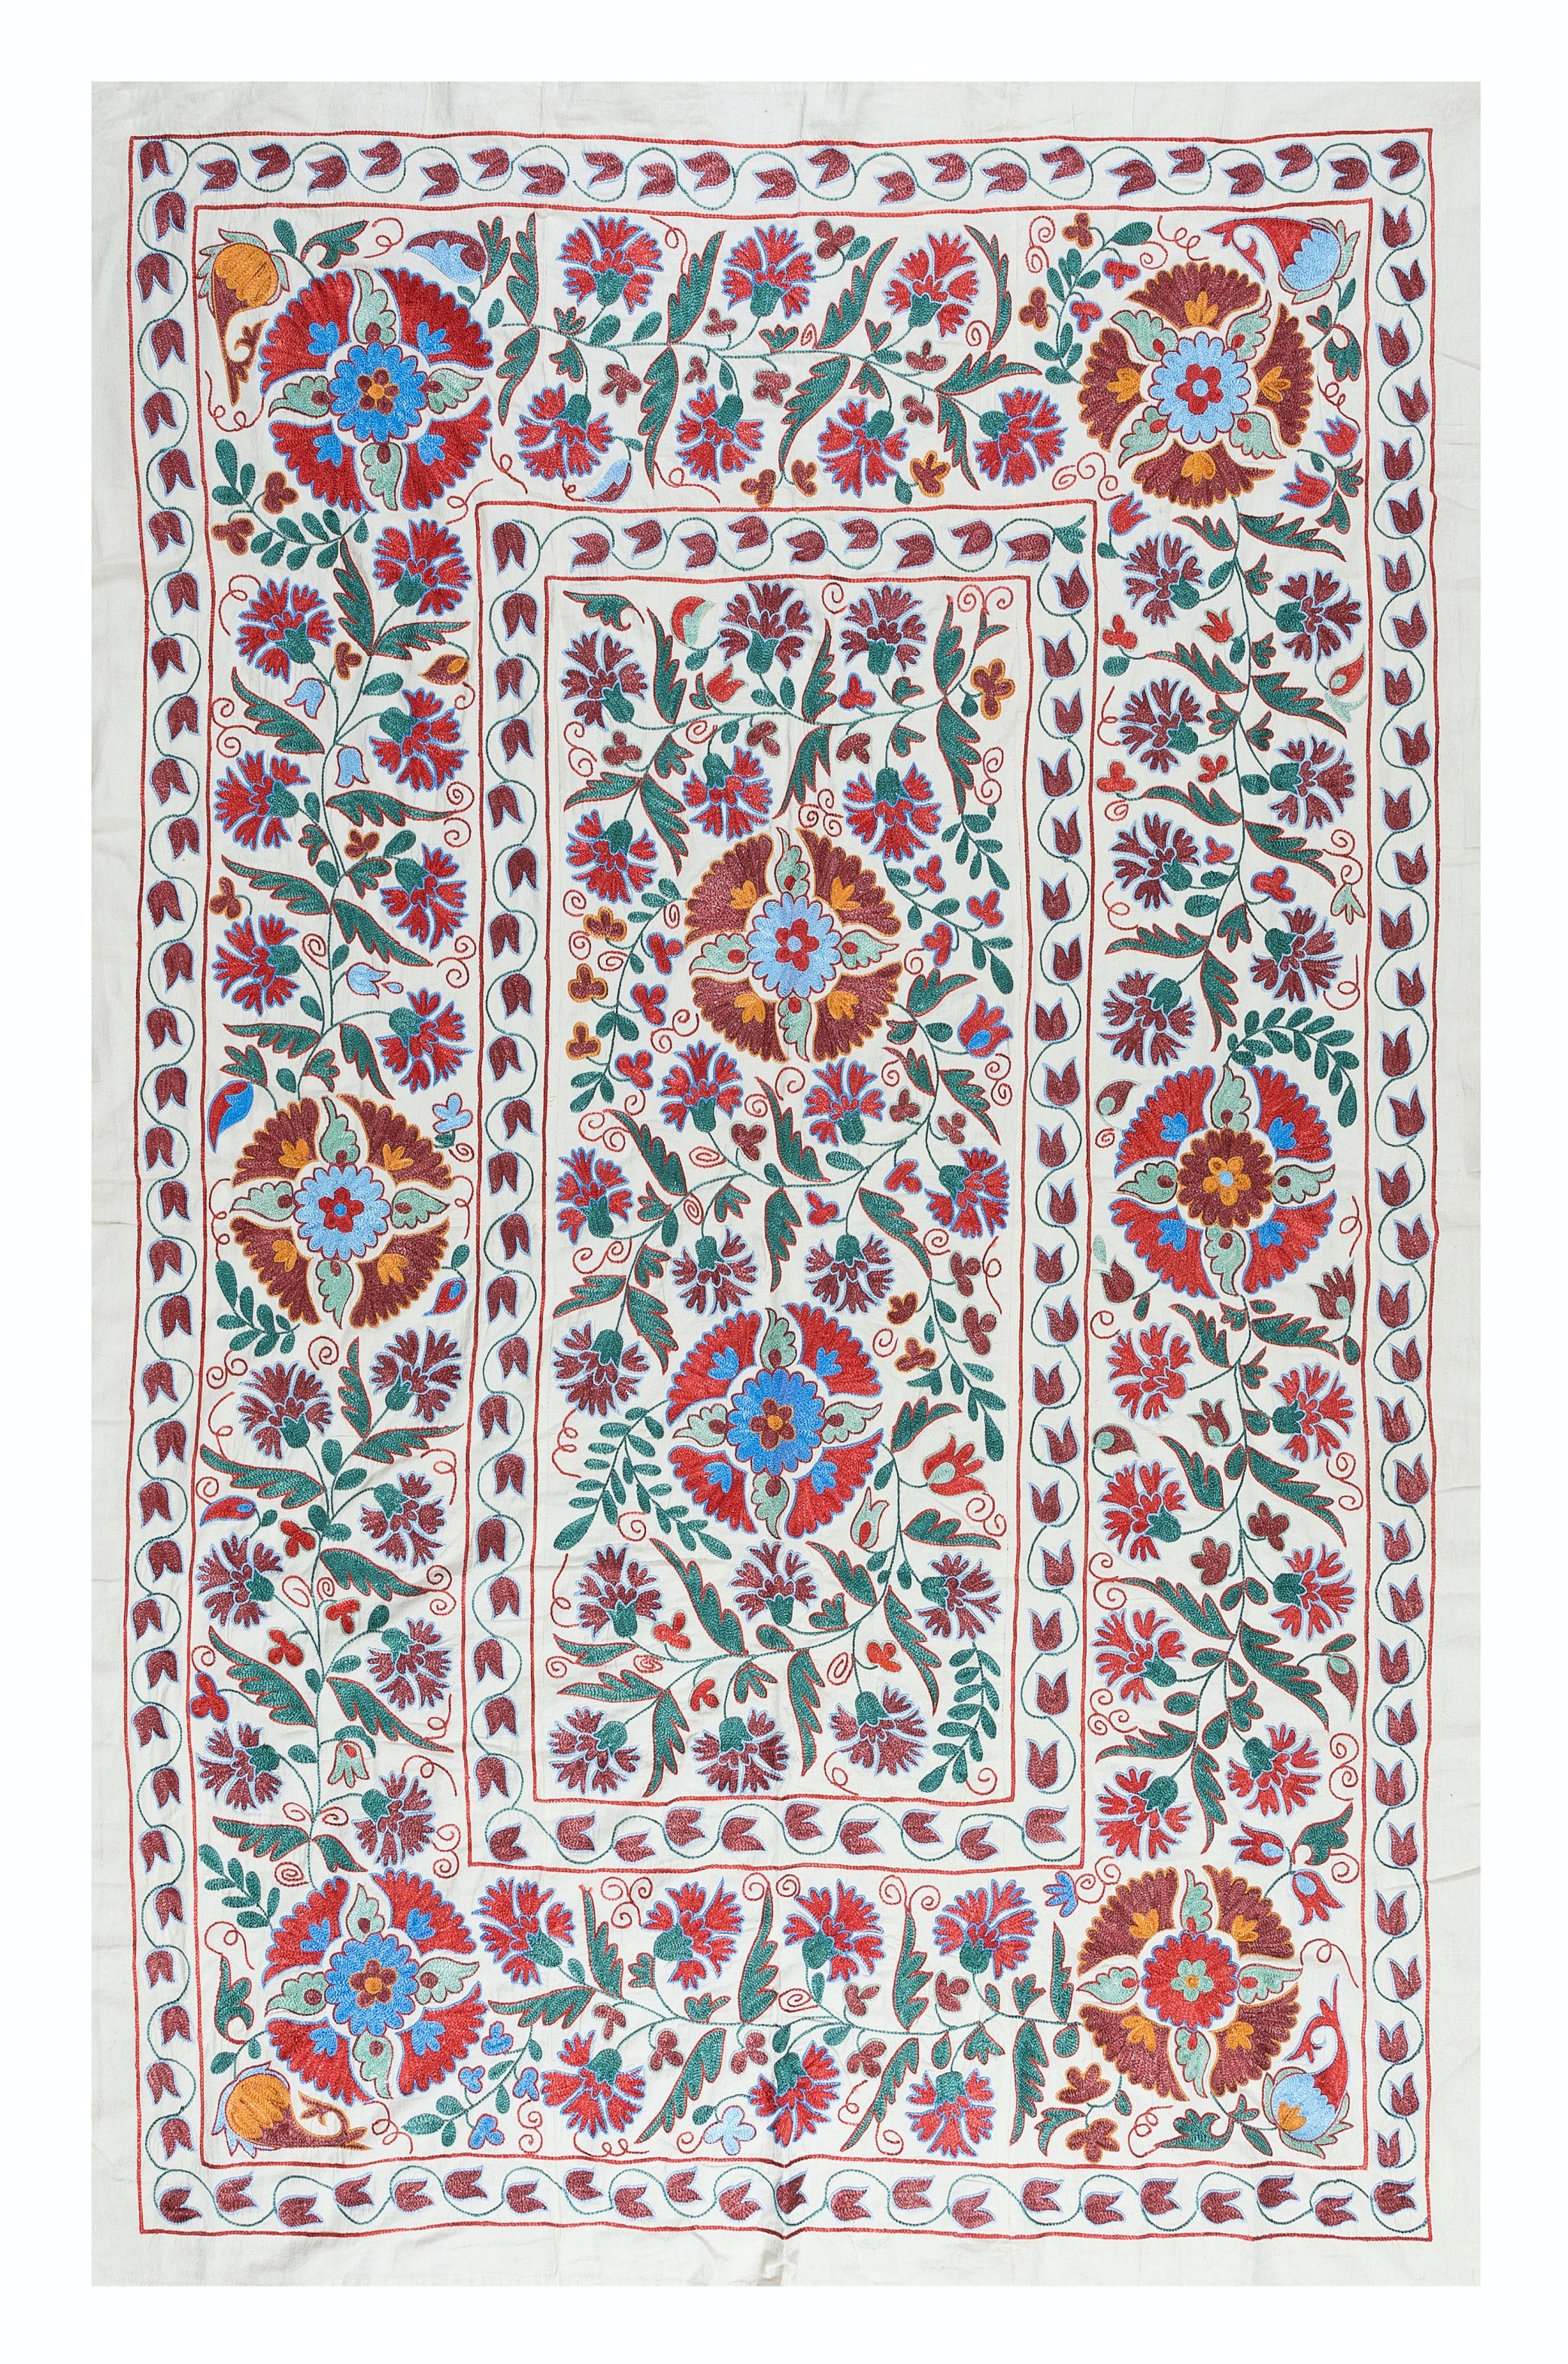 4.8x7 Ft Decorative Silk Hand Embroidery Suzani Wall Hanging, Uzbek Bedspread For Sale